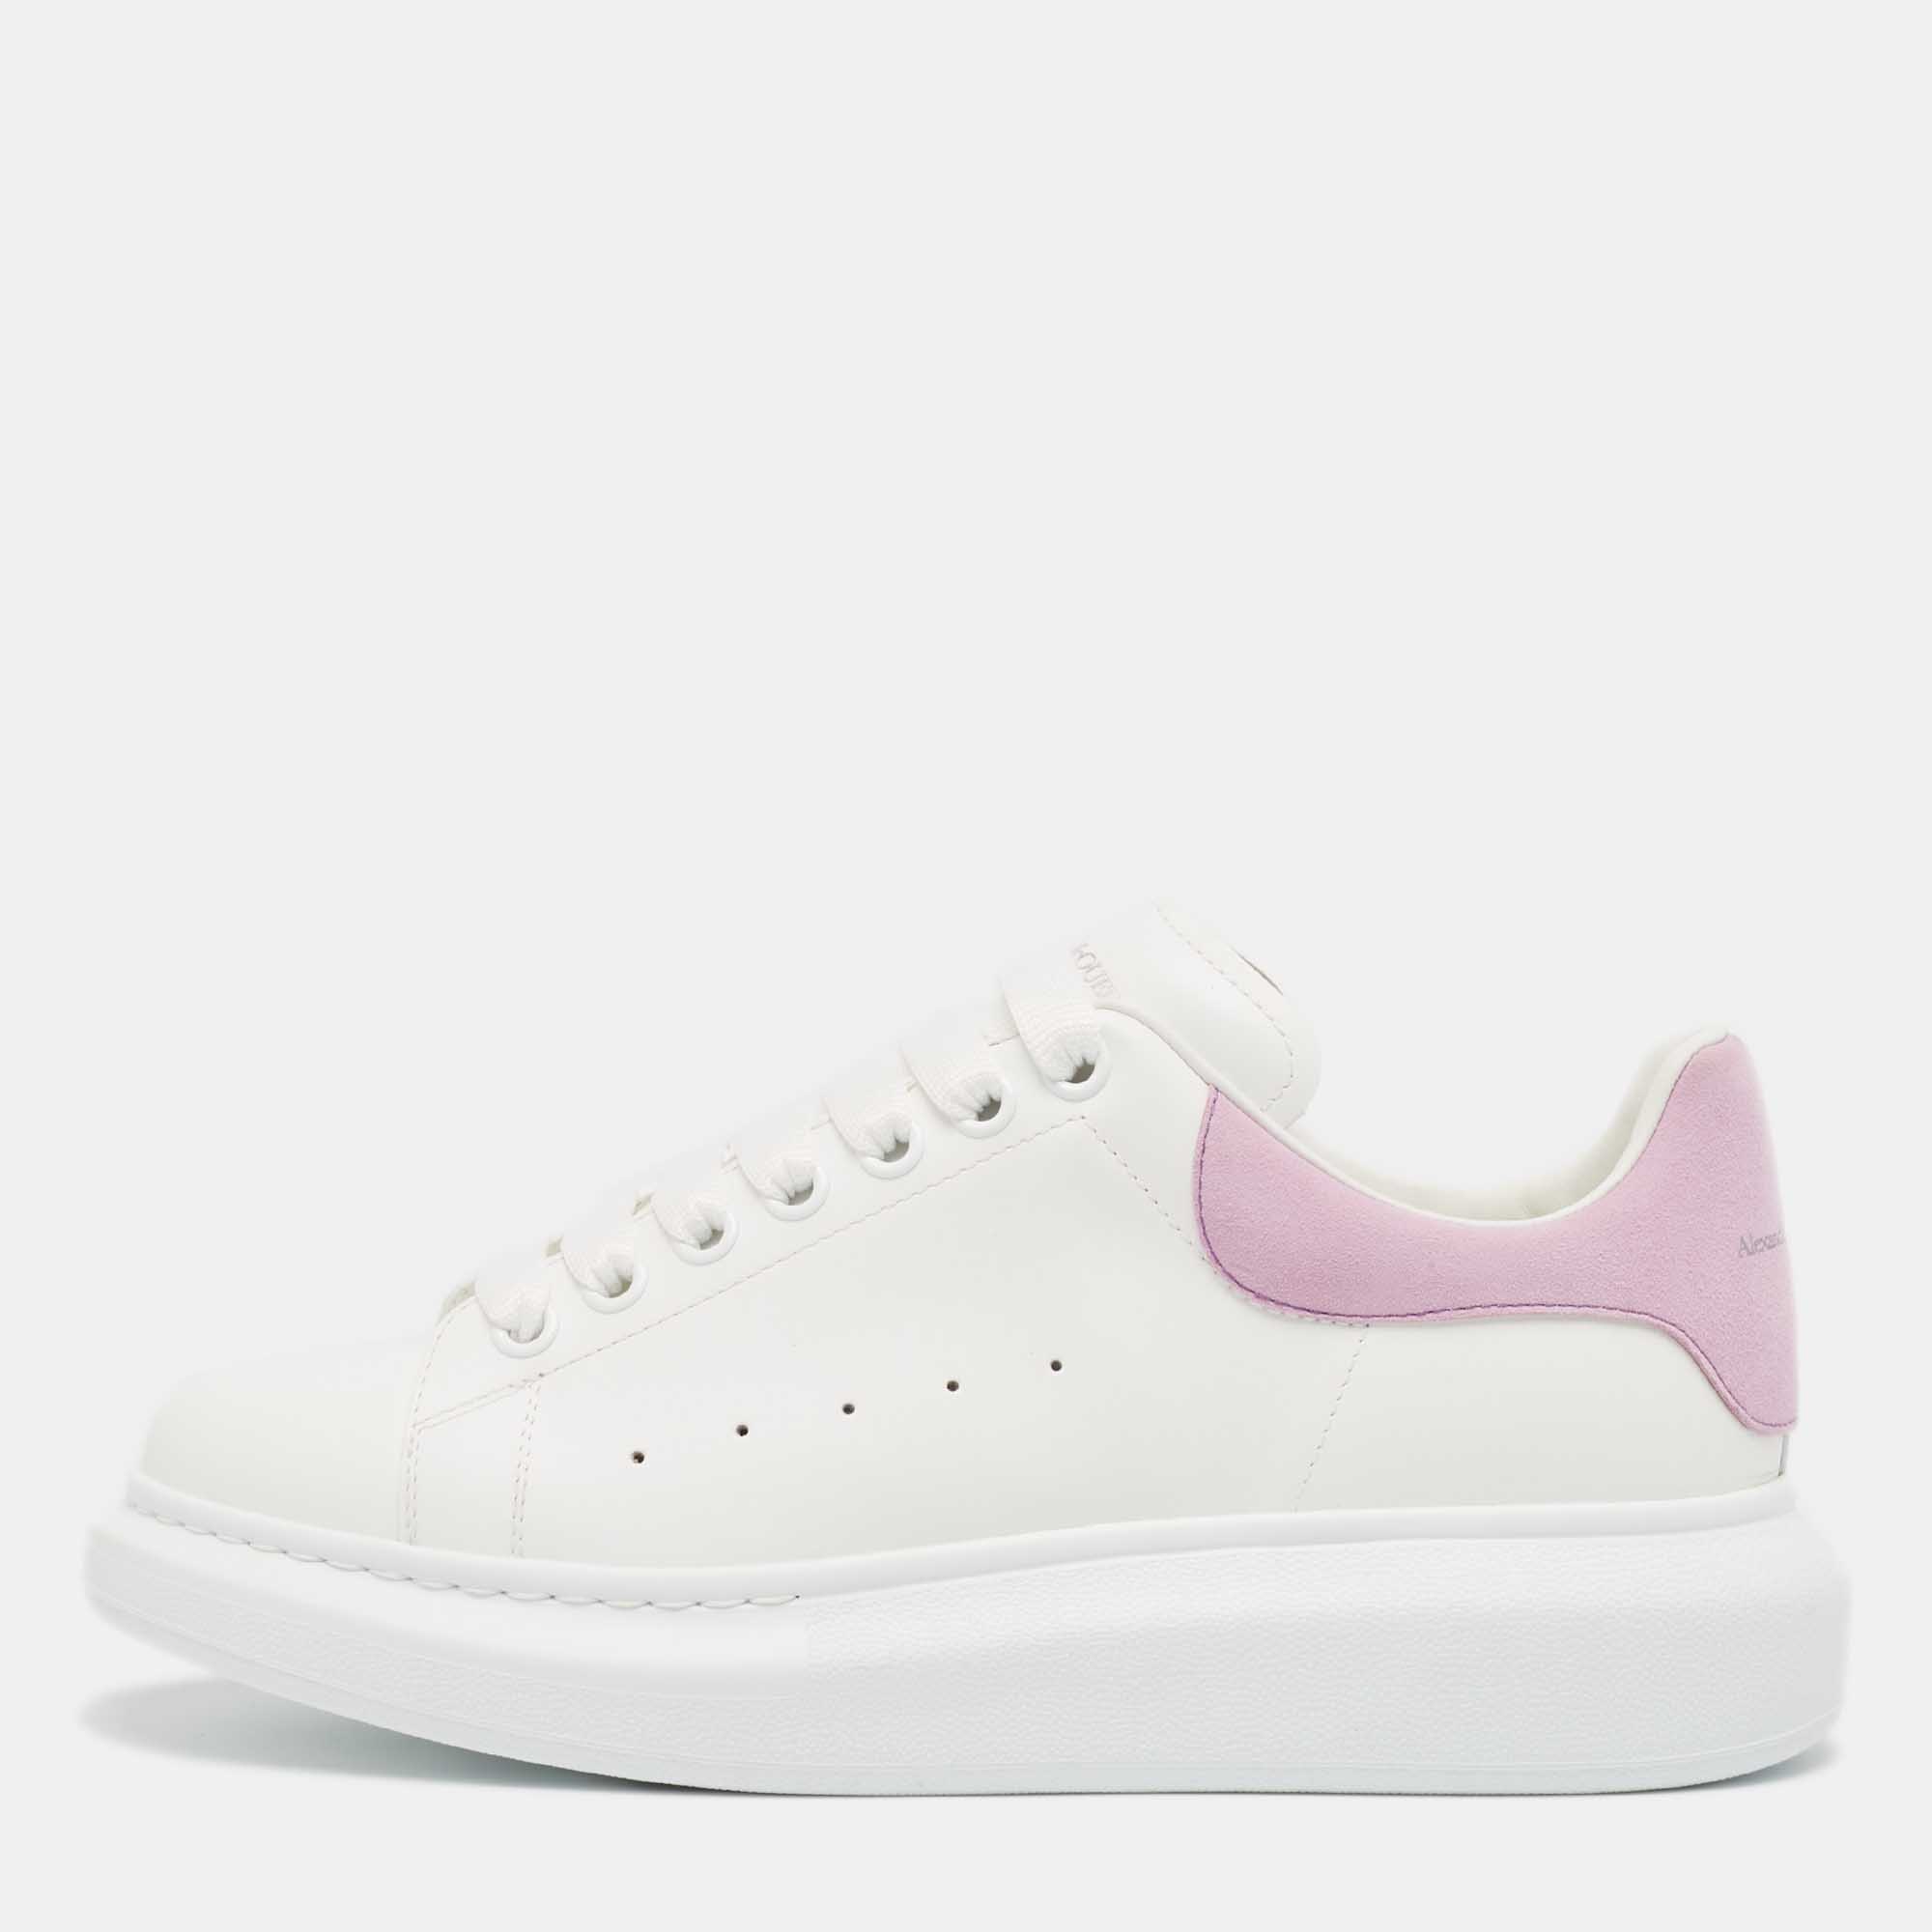 

Alexander McQueen White/Purples Leather Oversized Sneakers Size